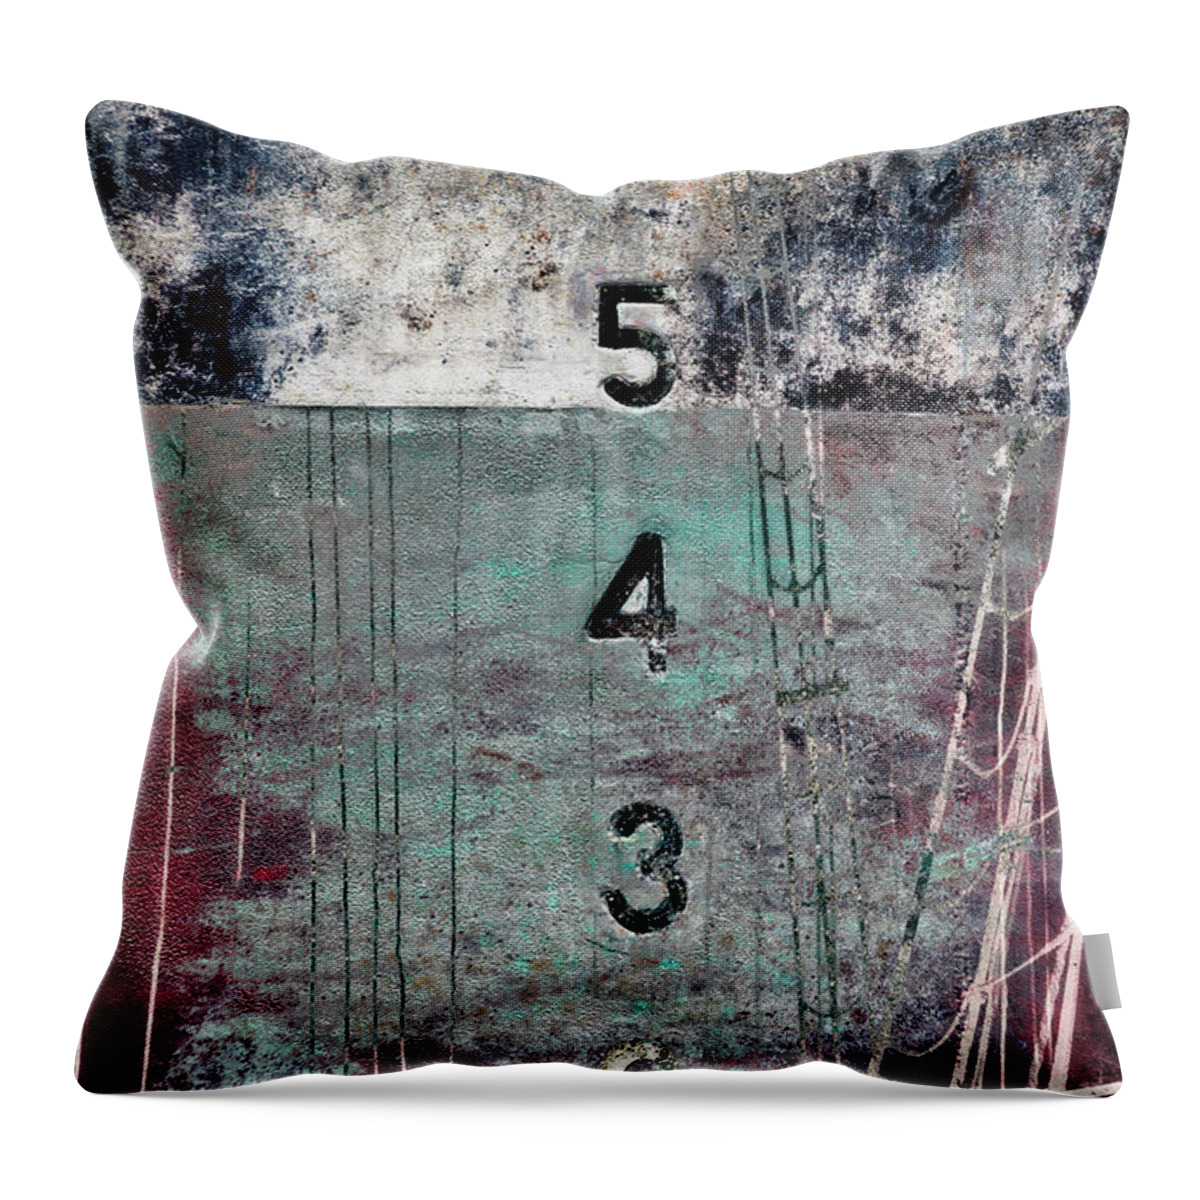 Depth Perception Throw Pillow featuring the mixed media Depth Perception by Carol Leigh